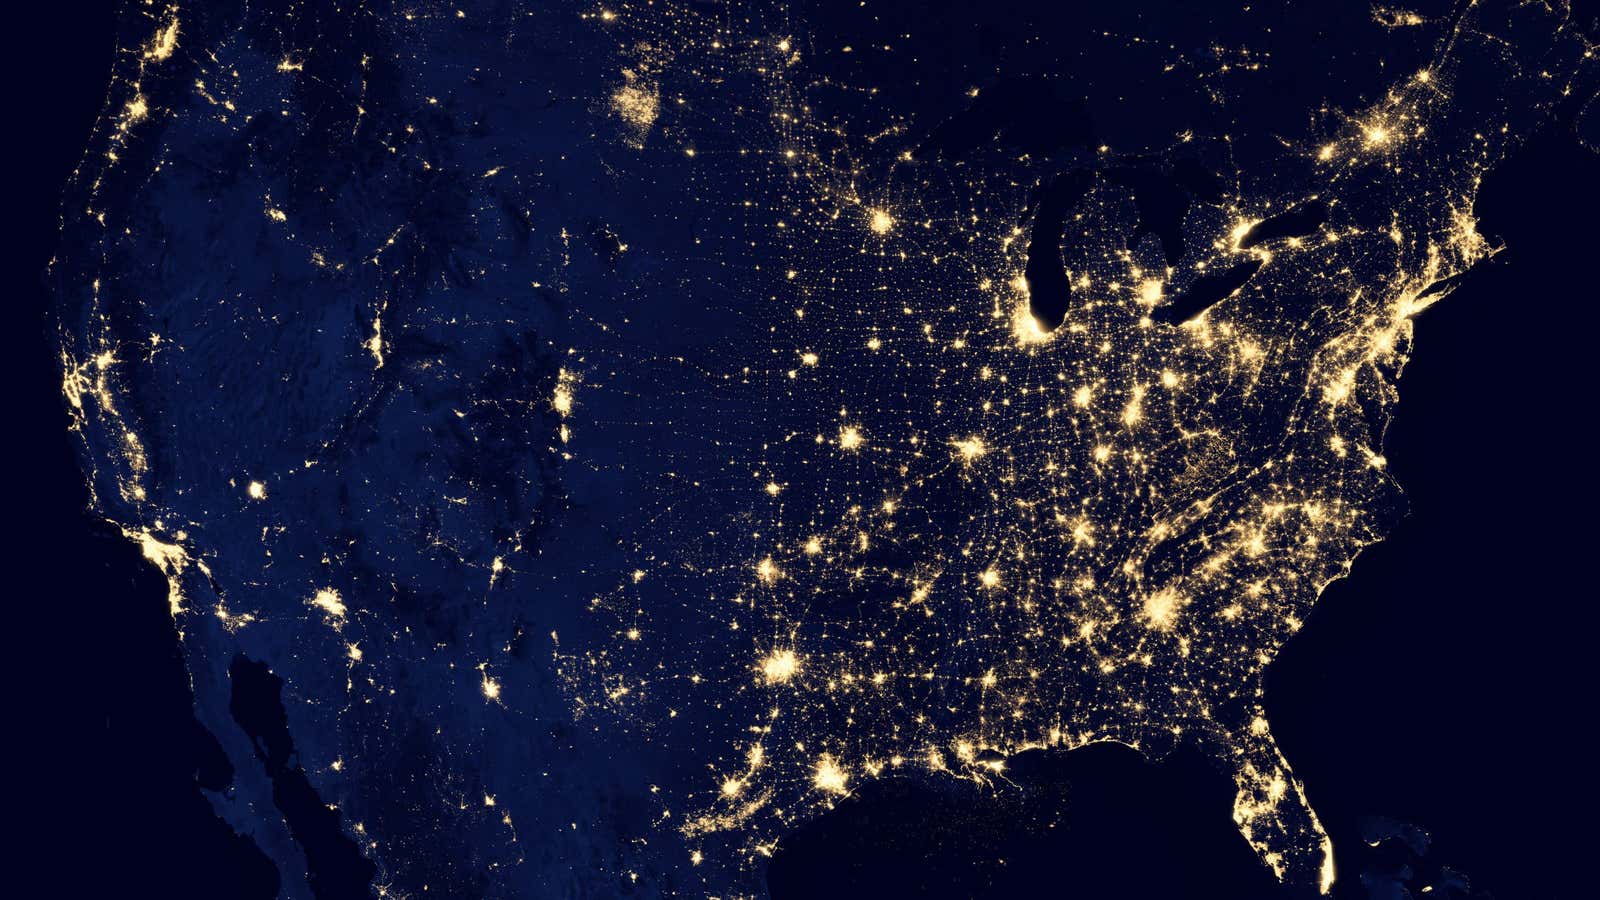 NASA’s nighttime map of the United States